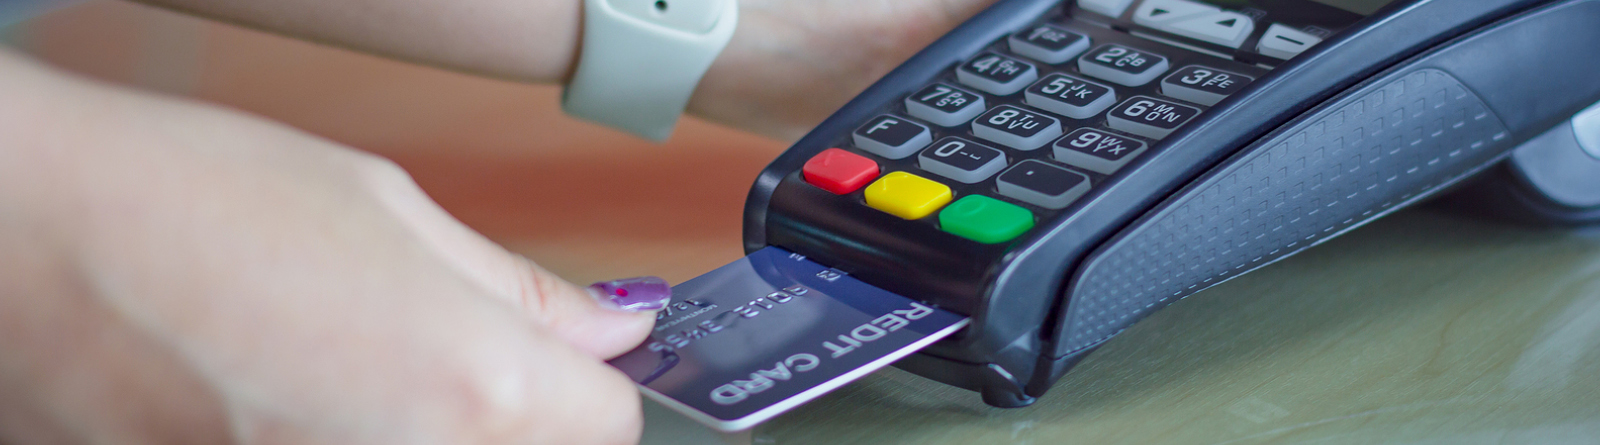 Person making a purchase with a debit card